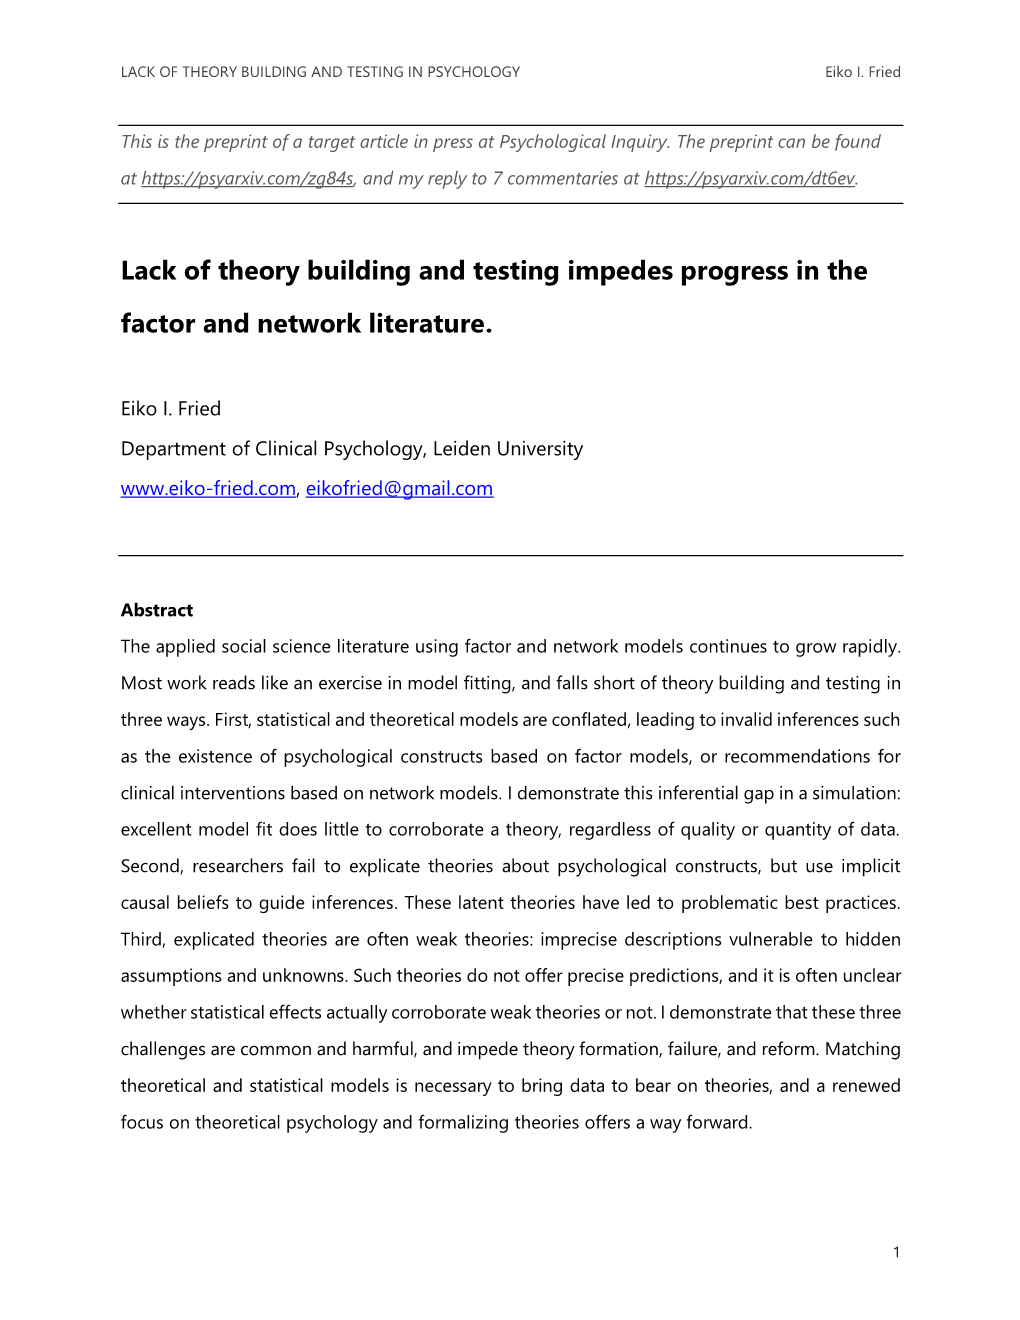 Lack of Theory Building and Testing Impedes Progress in the Factor and Network Literature